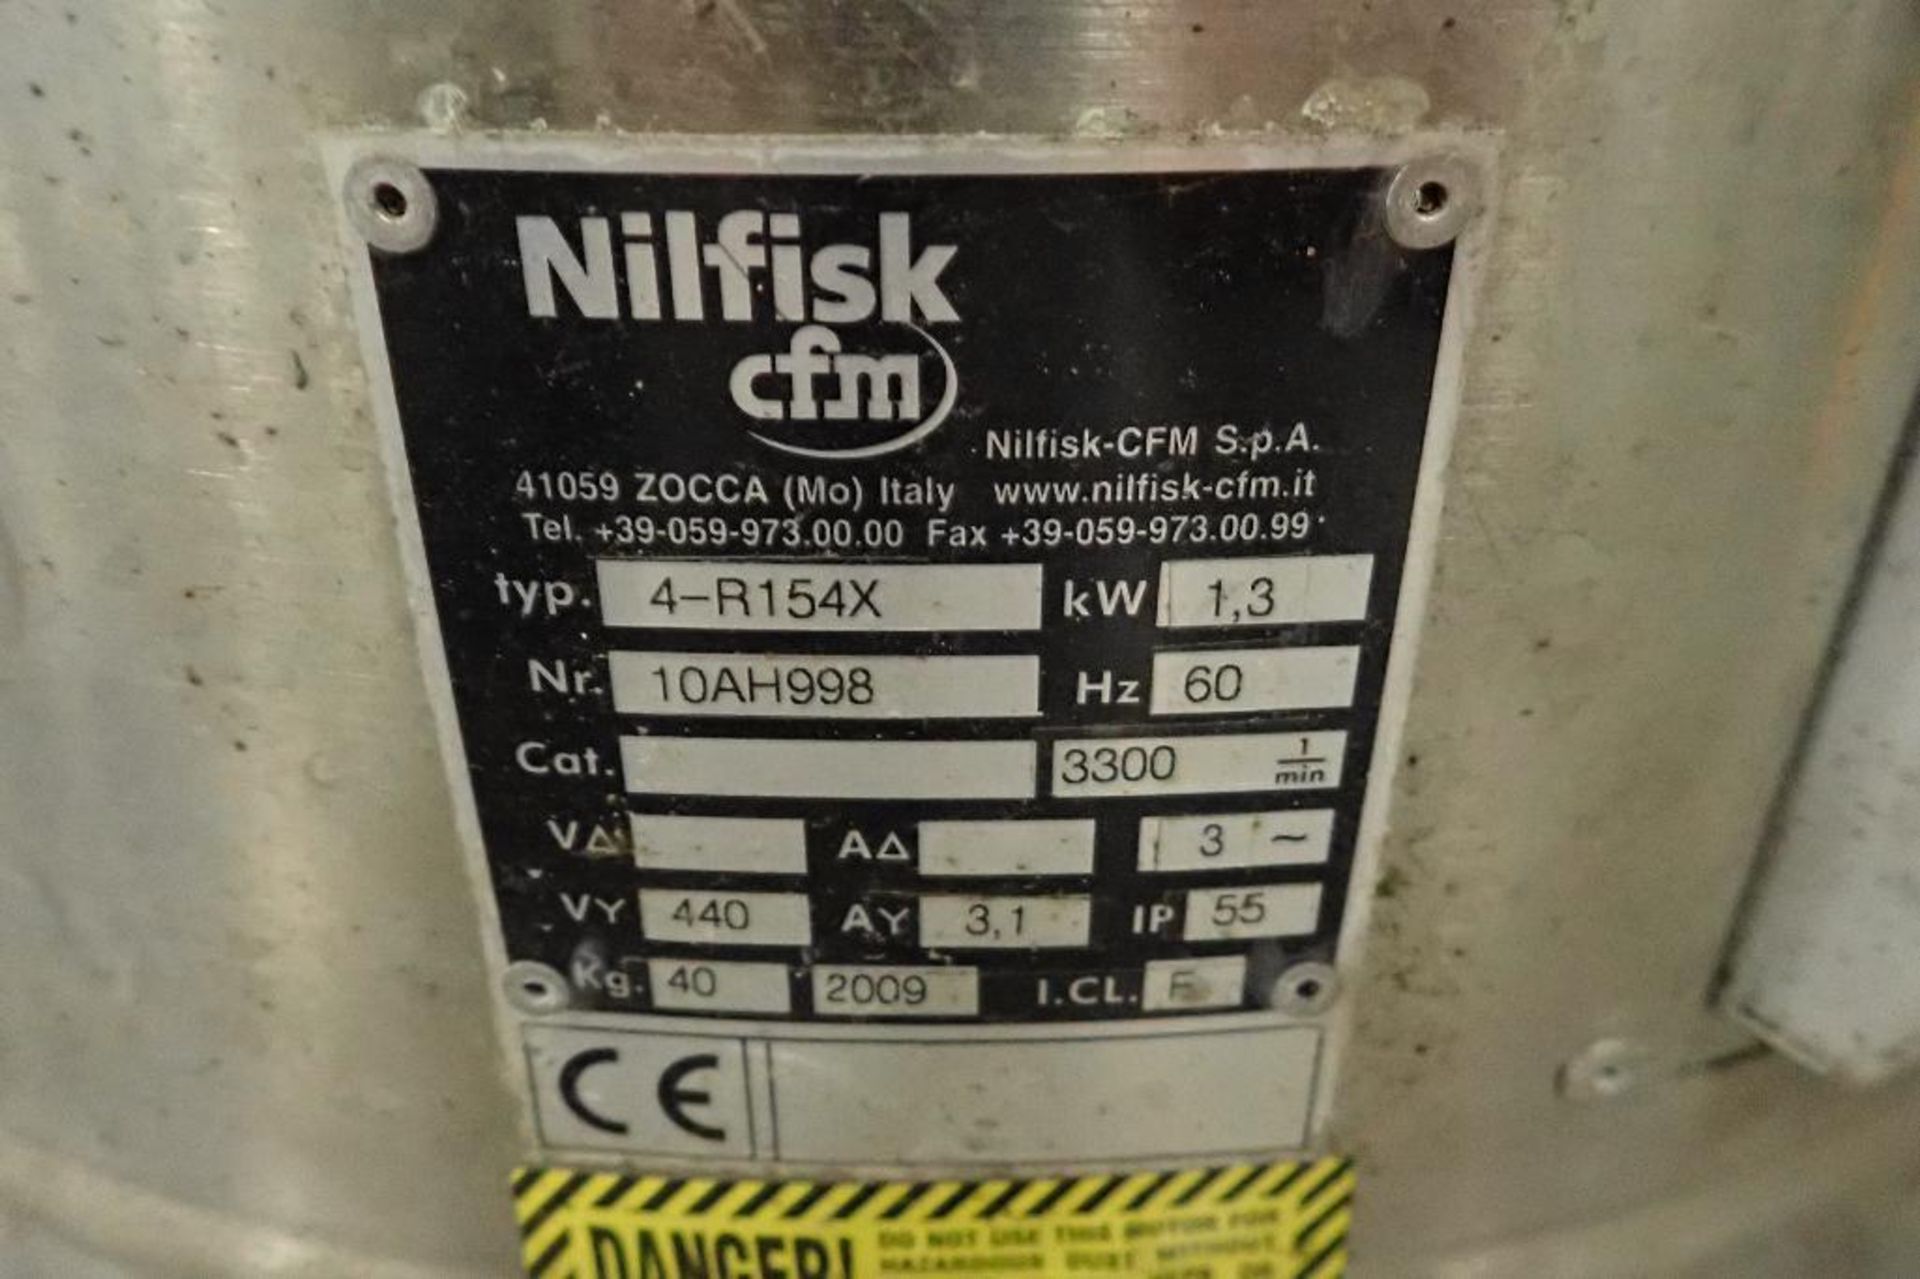 Nilfisk commercial vacuum, Type 4-R154X, SN 10AH998. **Rigging Fee: $25** (Located in 3703 - Eagan, - Image 3 of 3